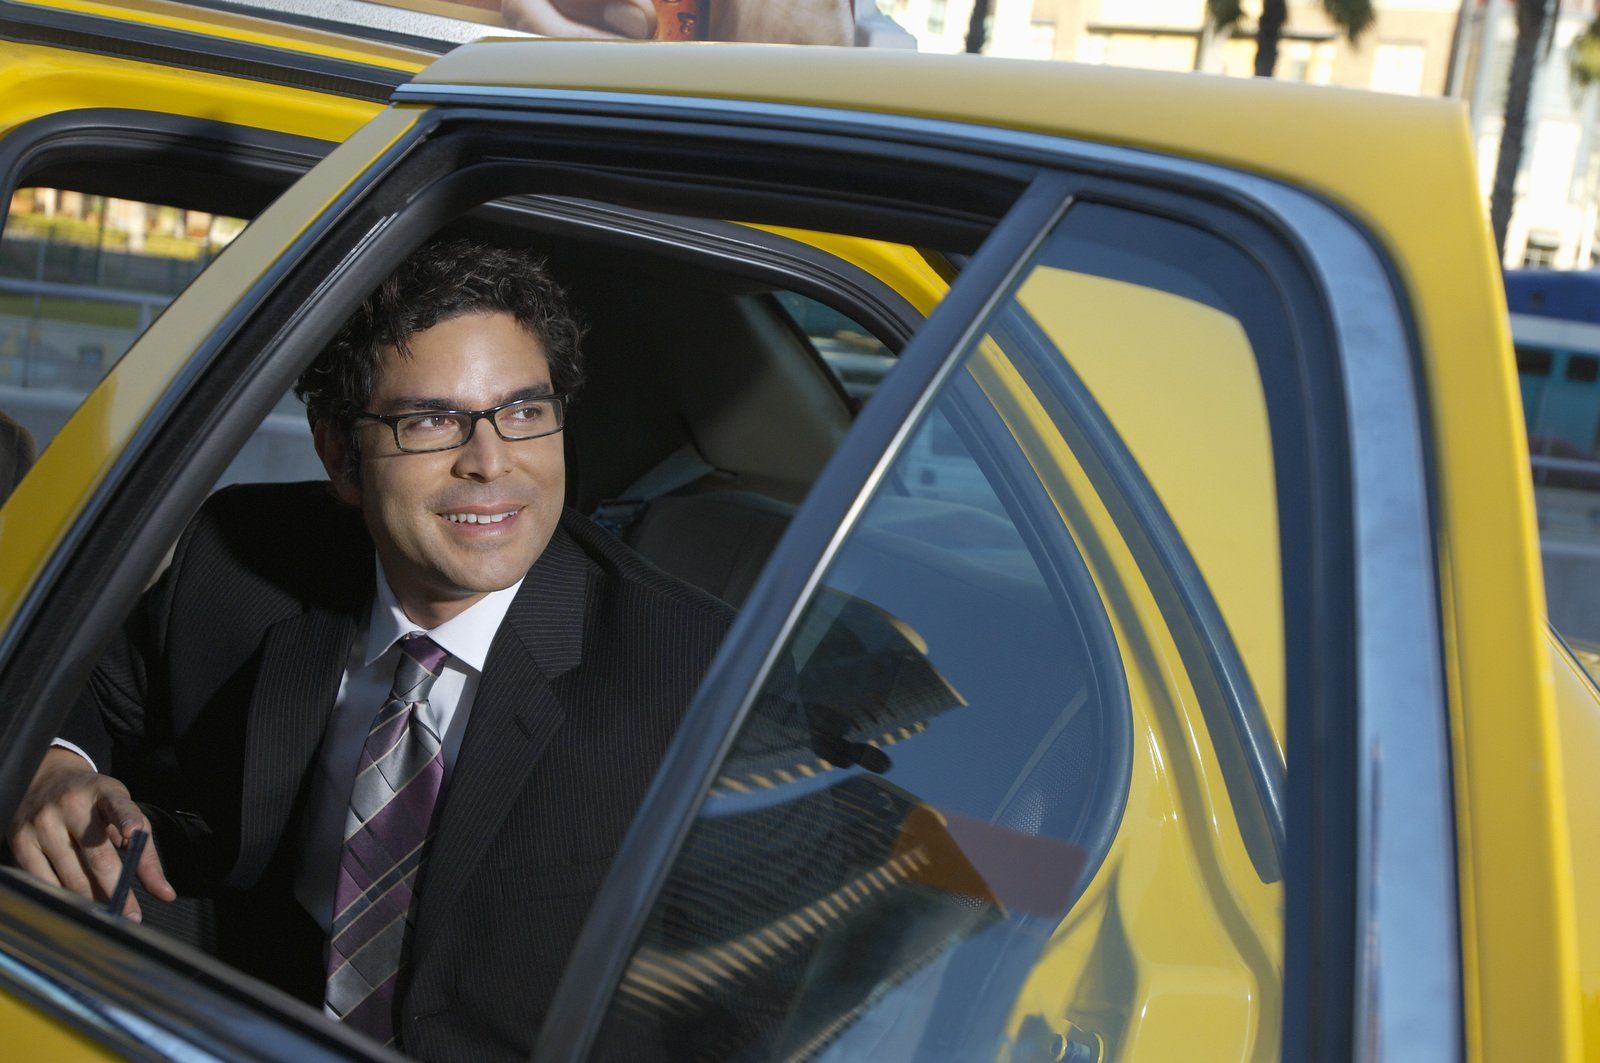 Man in suit exiting taxi while smiling